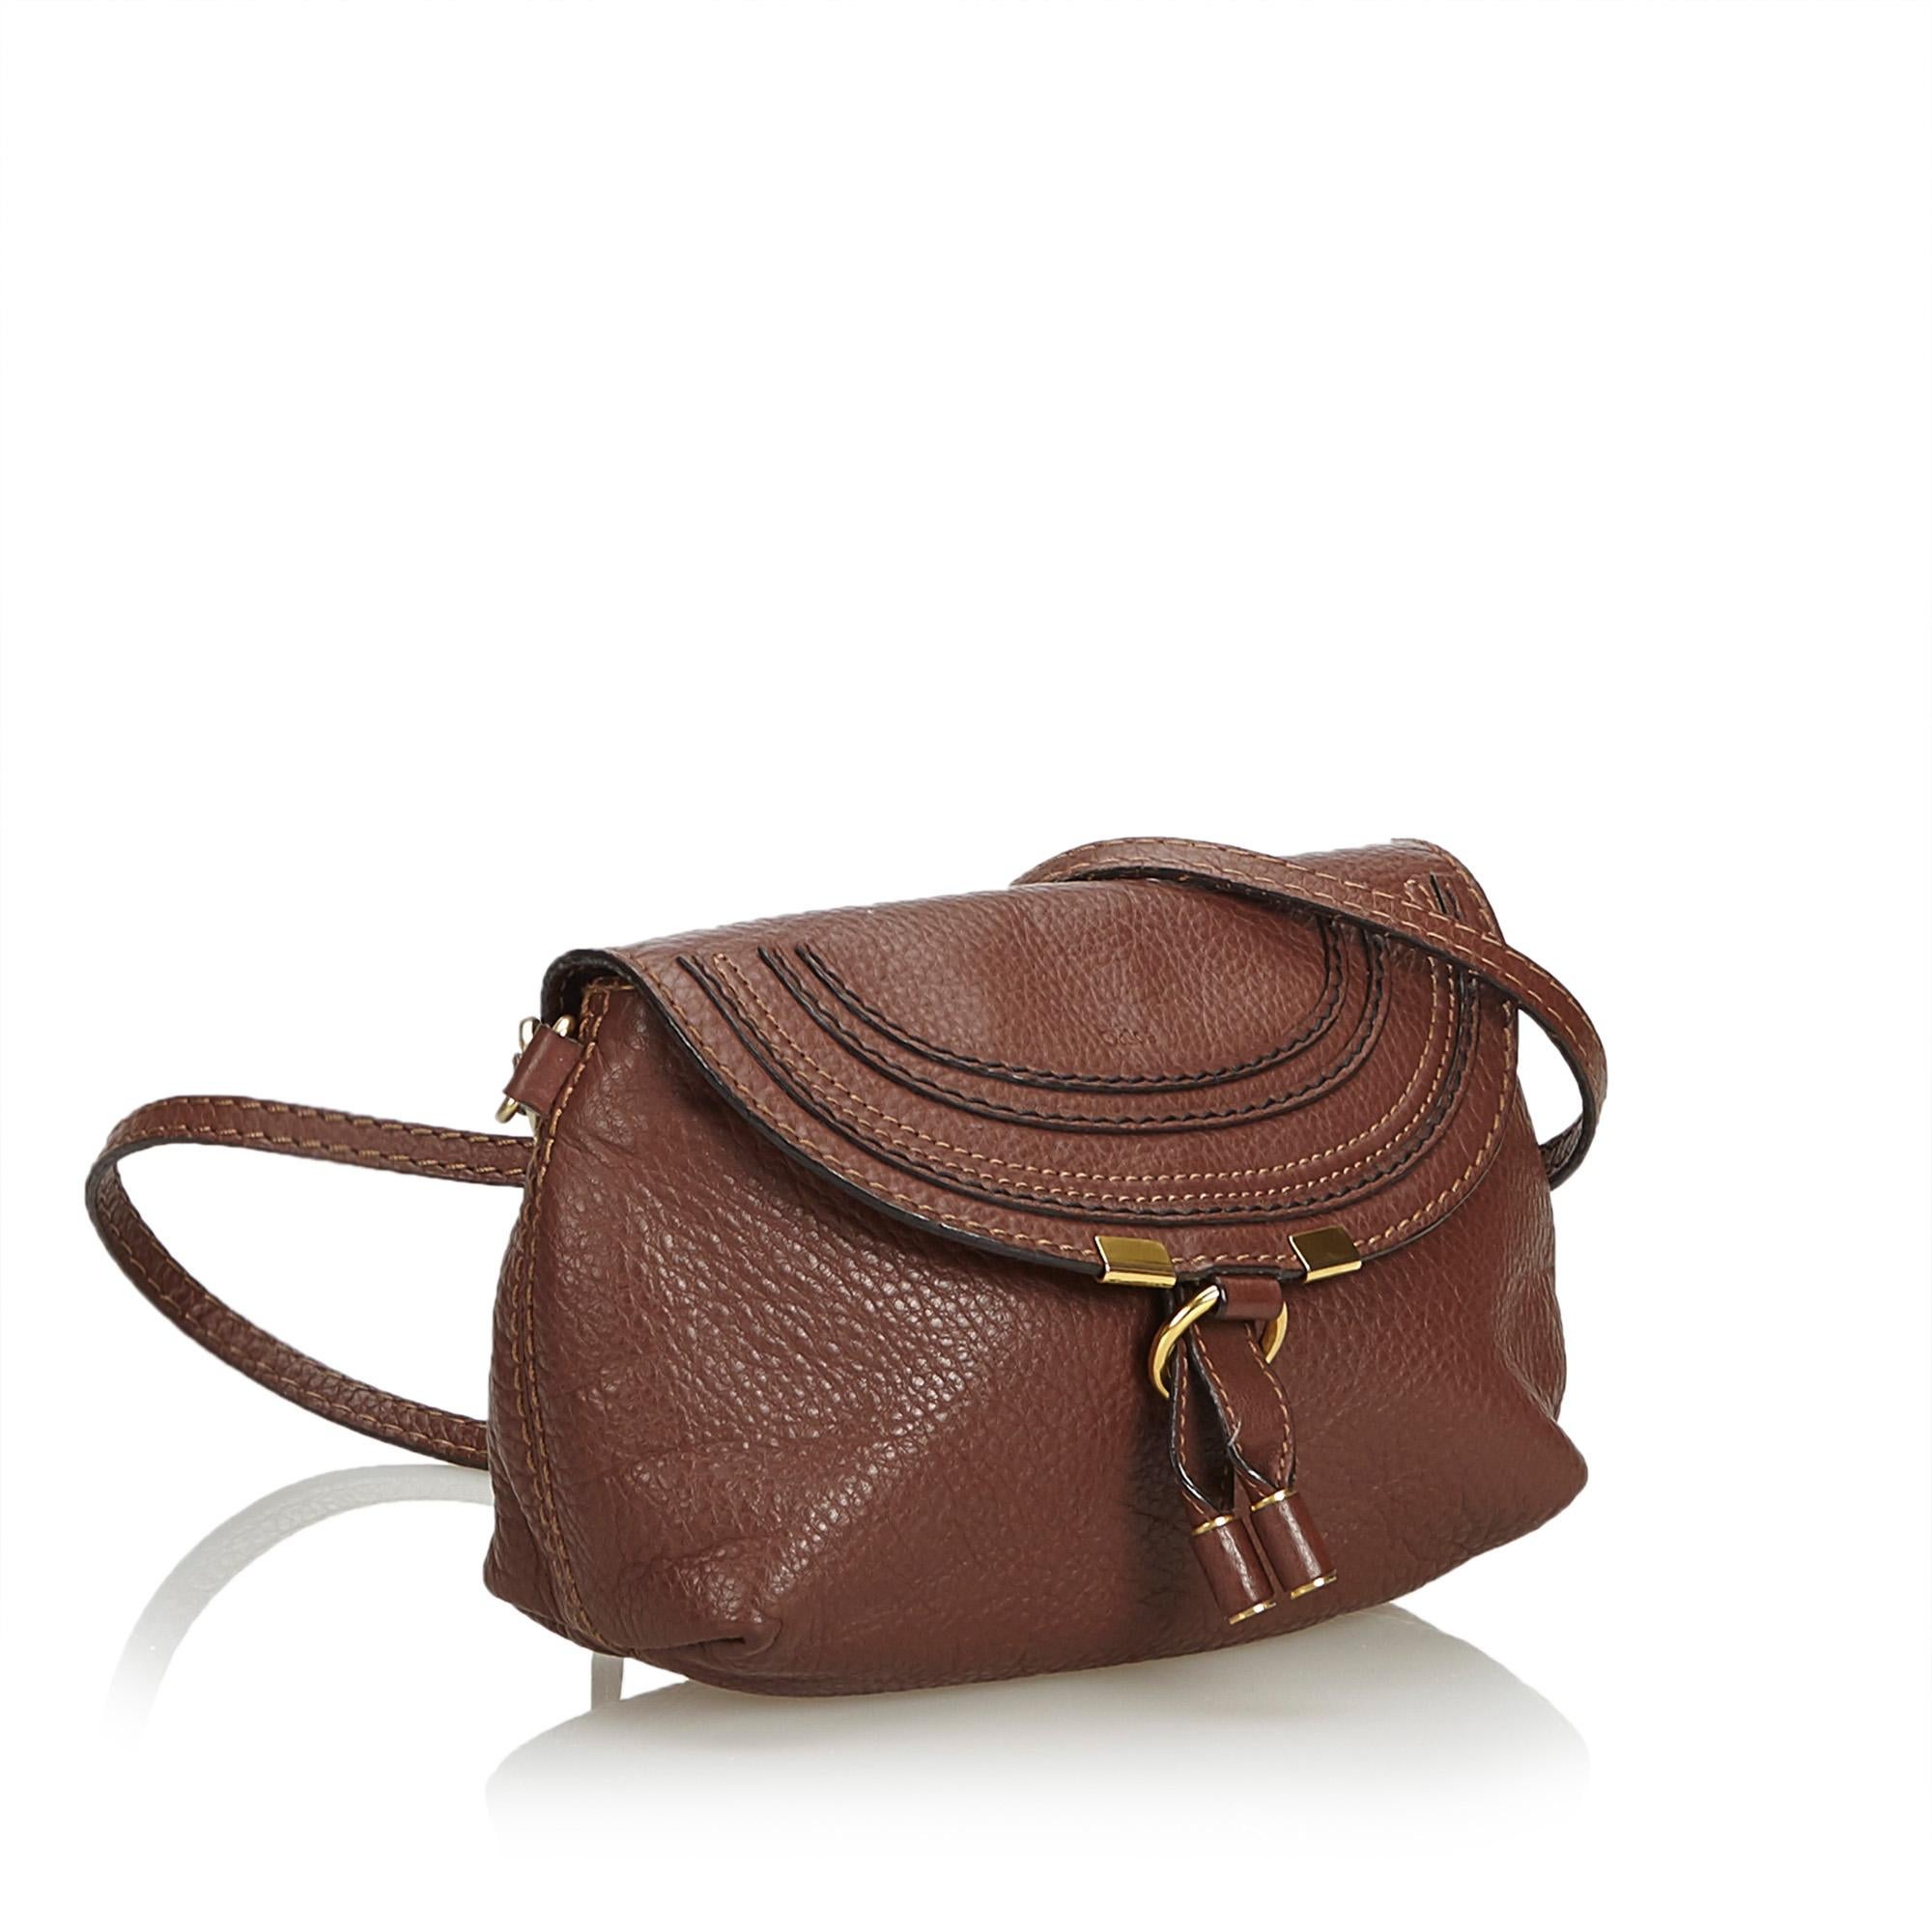 This Marcie crossbody bag features a leather body, a flat strap, a top flap with loop closure, and an interior slip pocket. It carries as B+ condition rating.

Inclusions: 
This item does not come with inclusions.

Dimensions:
Length: 13.00